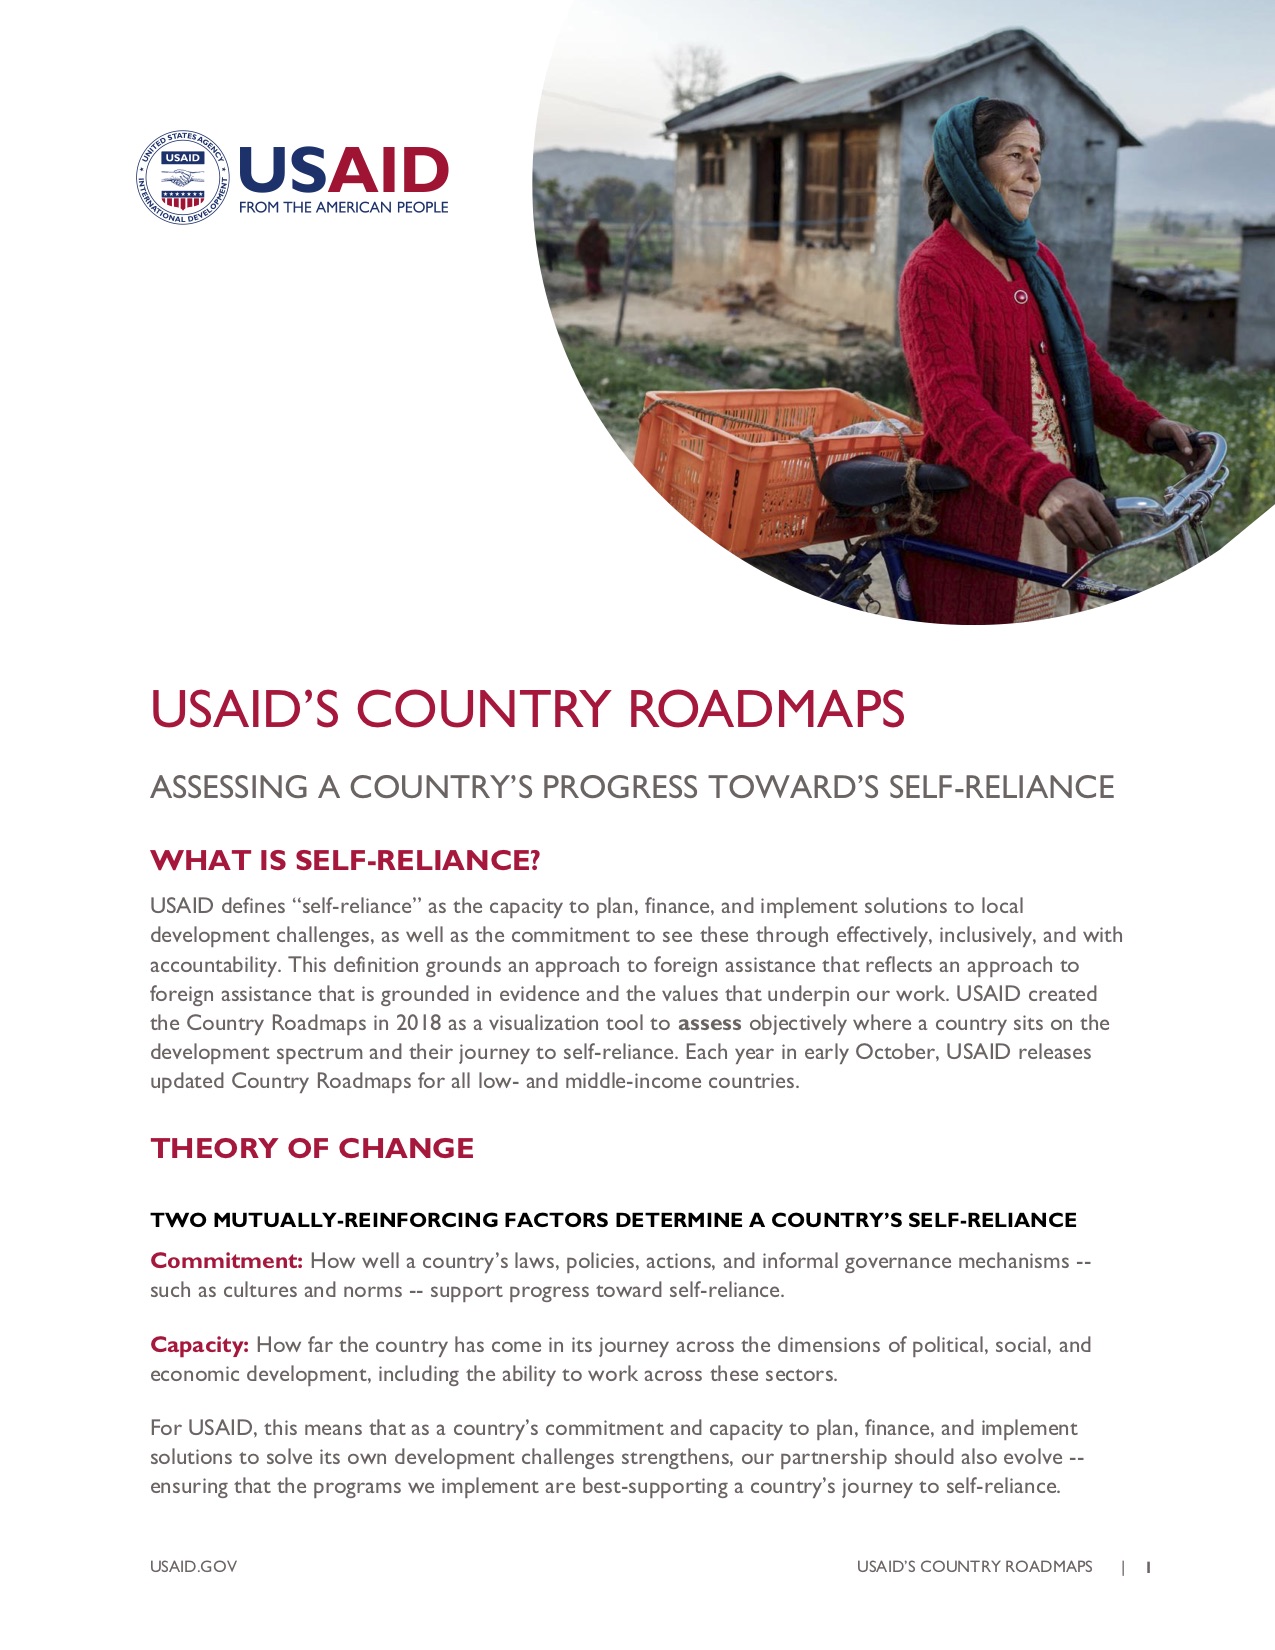 USAID's Country Roadmaps Fact Sheet